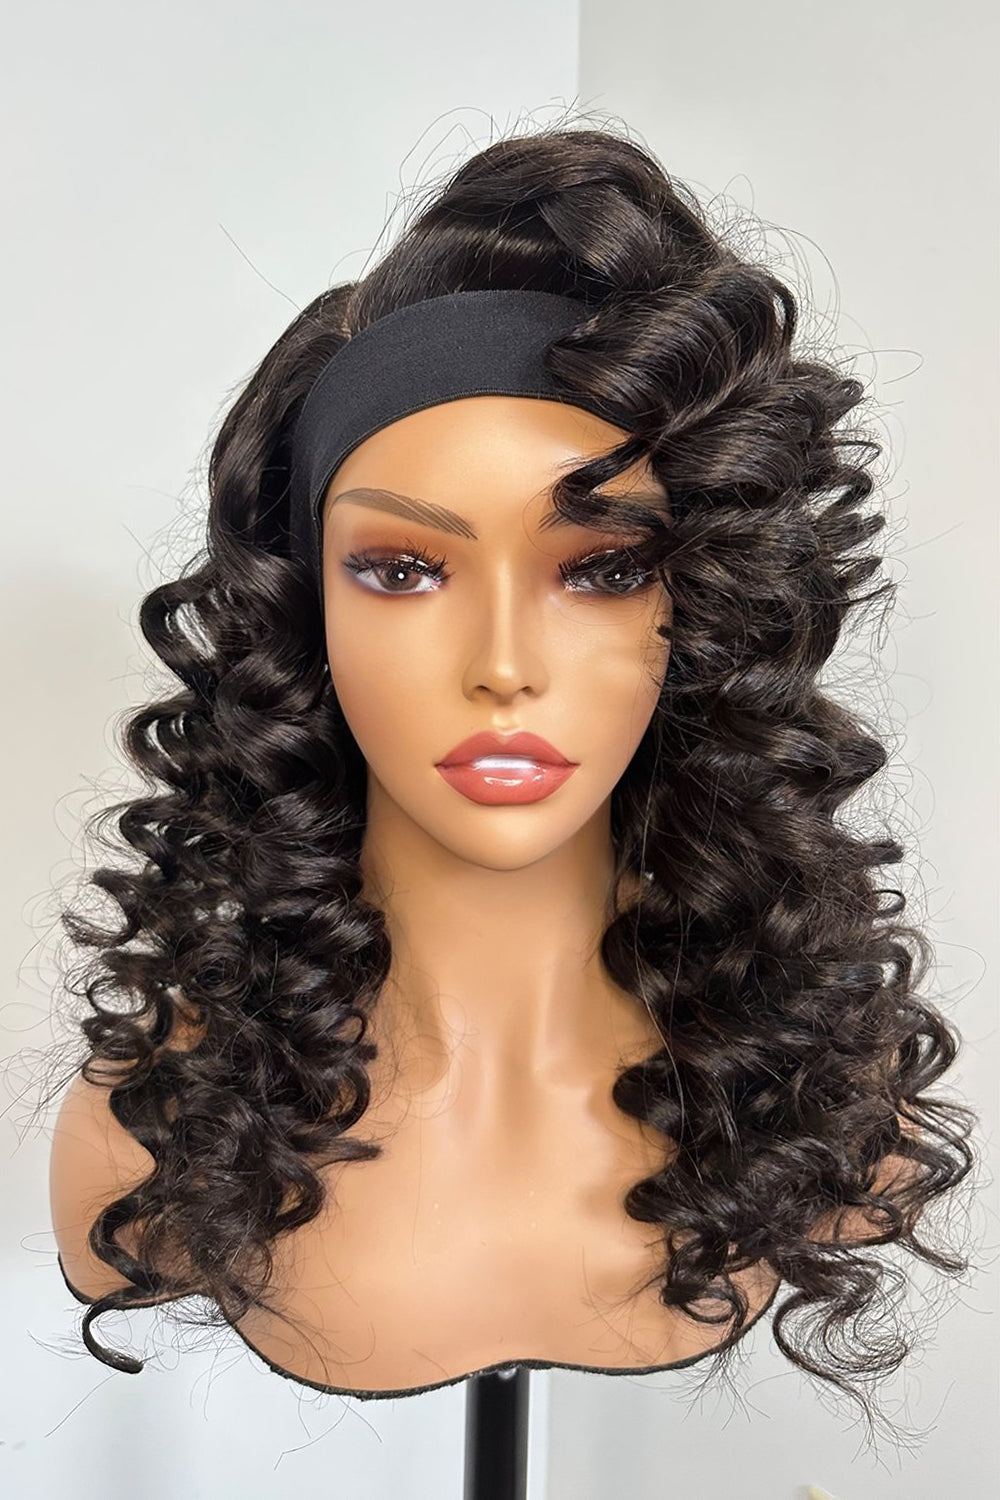 Upgrade Top Lace Headband Wigs Fashion Curly Side Part